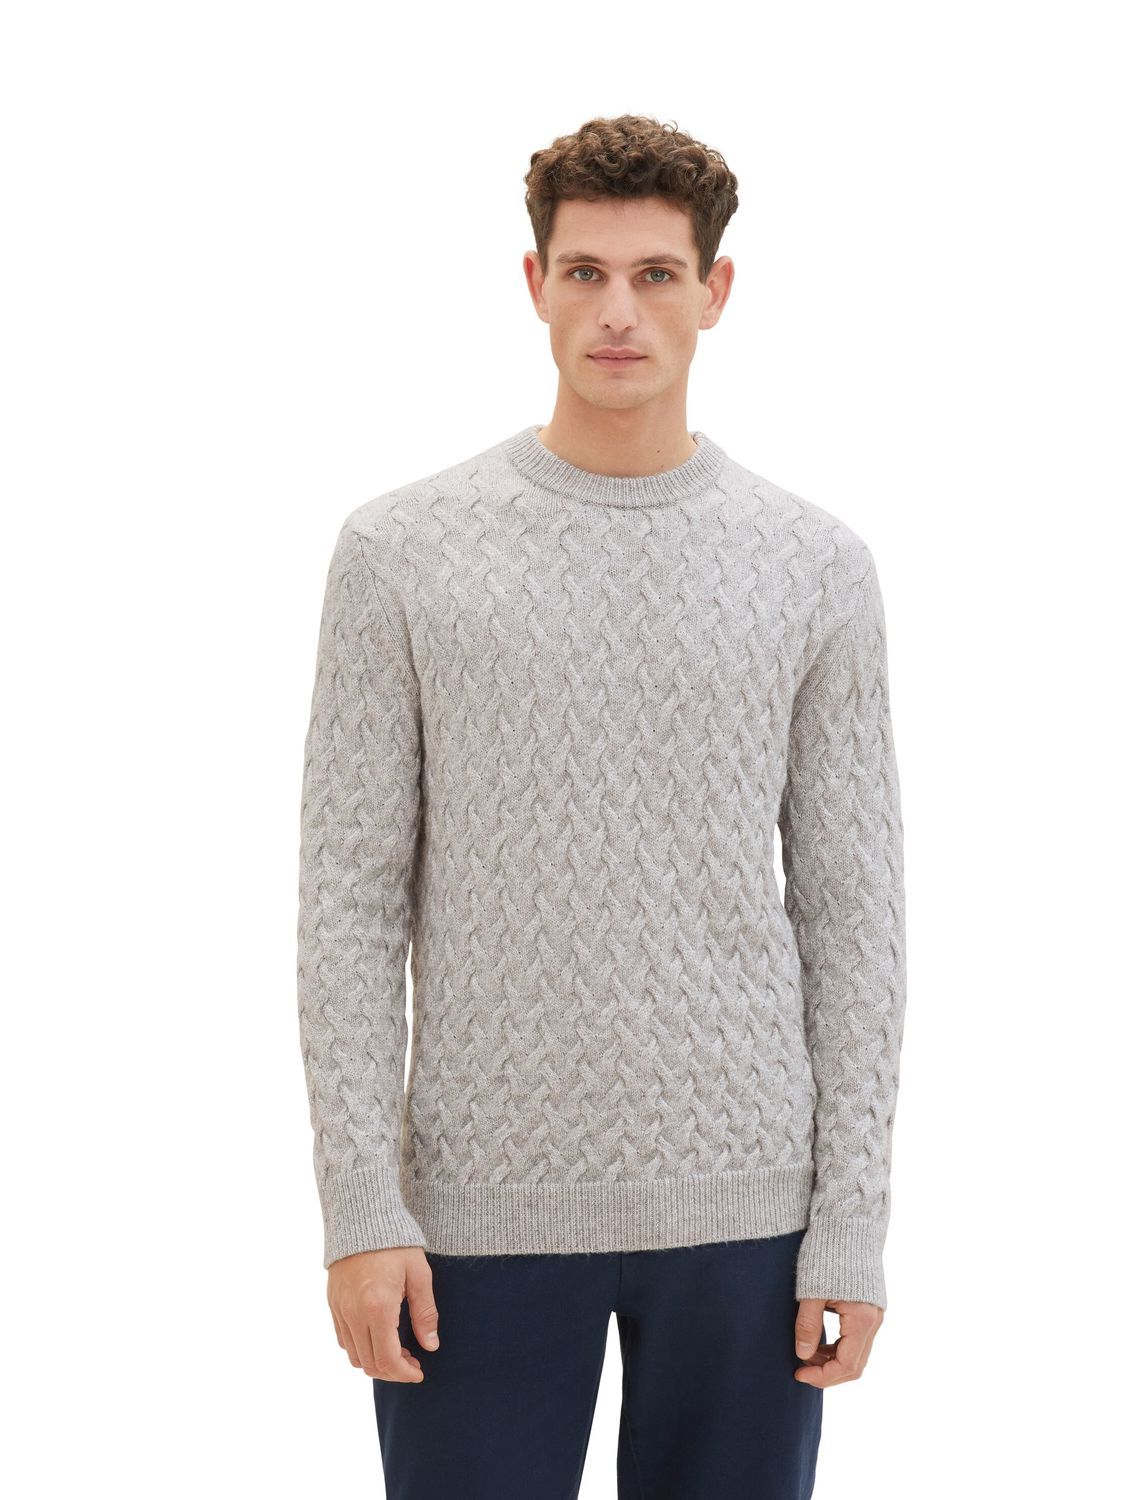 Пуловер Tom Tailor COSY CABLE KNIT, серый свитер tom tailor denim cosy knit розовый